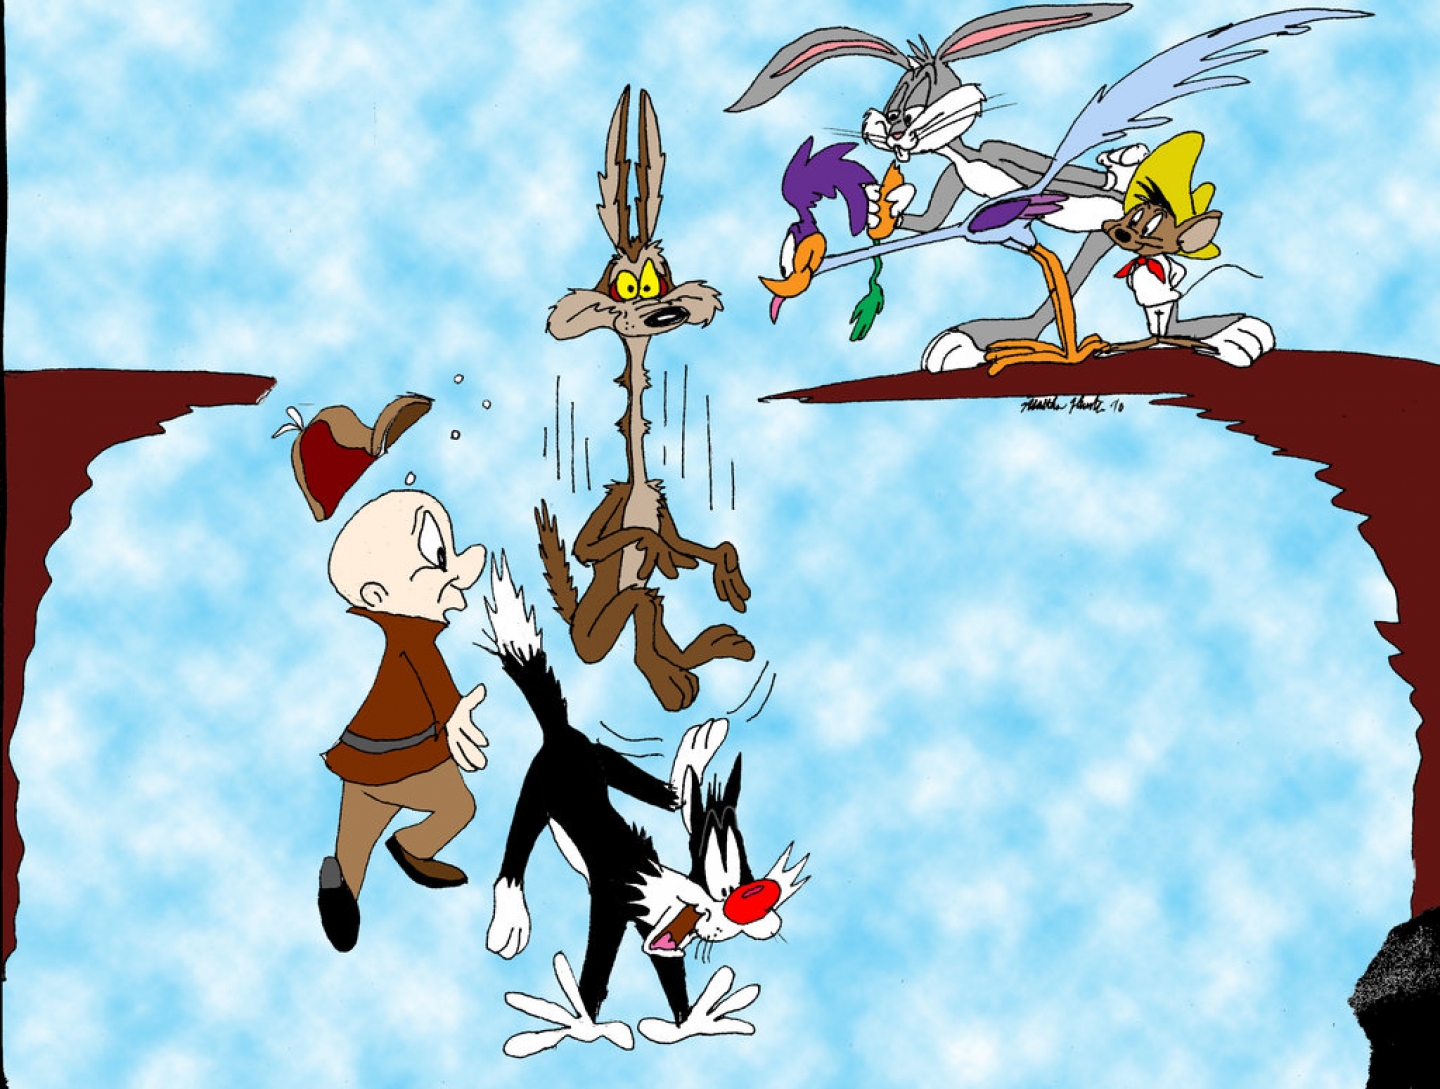 road runner, tv show, looney tunes, bugs bunny, elmer fudd, speedy gonzales, sylvester (looney tunes), wile e coyote cellphone